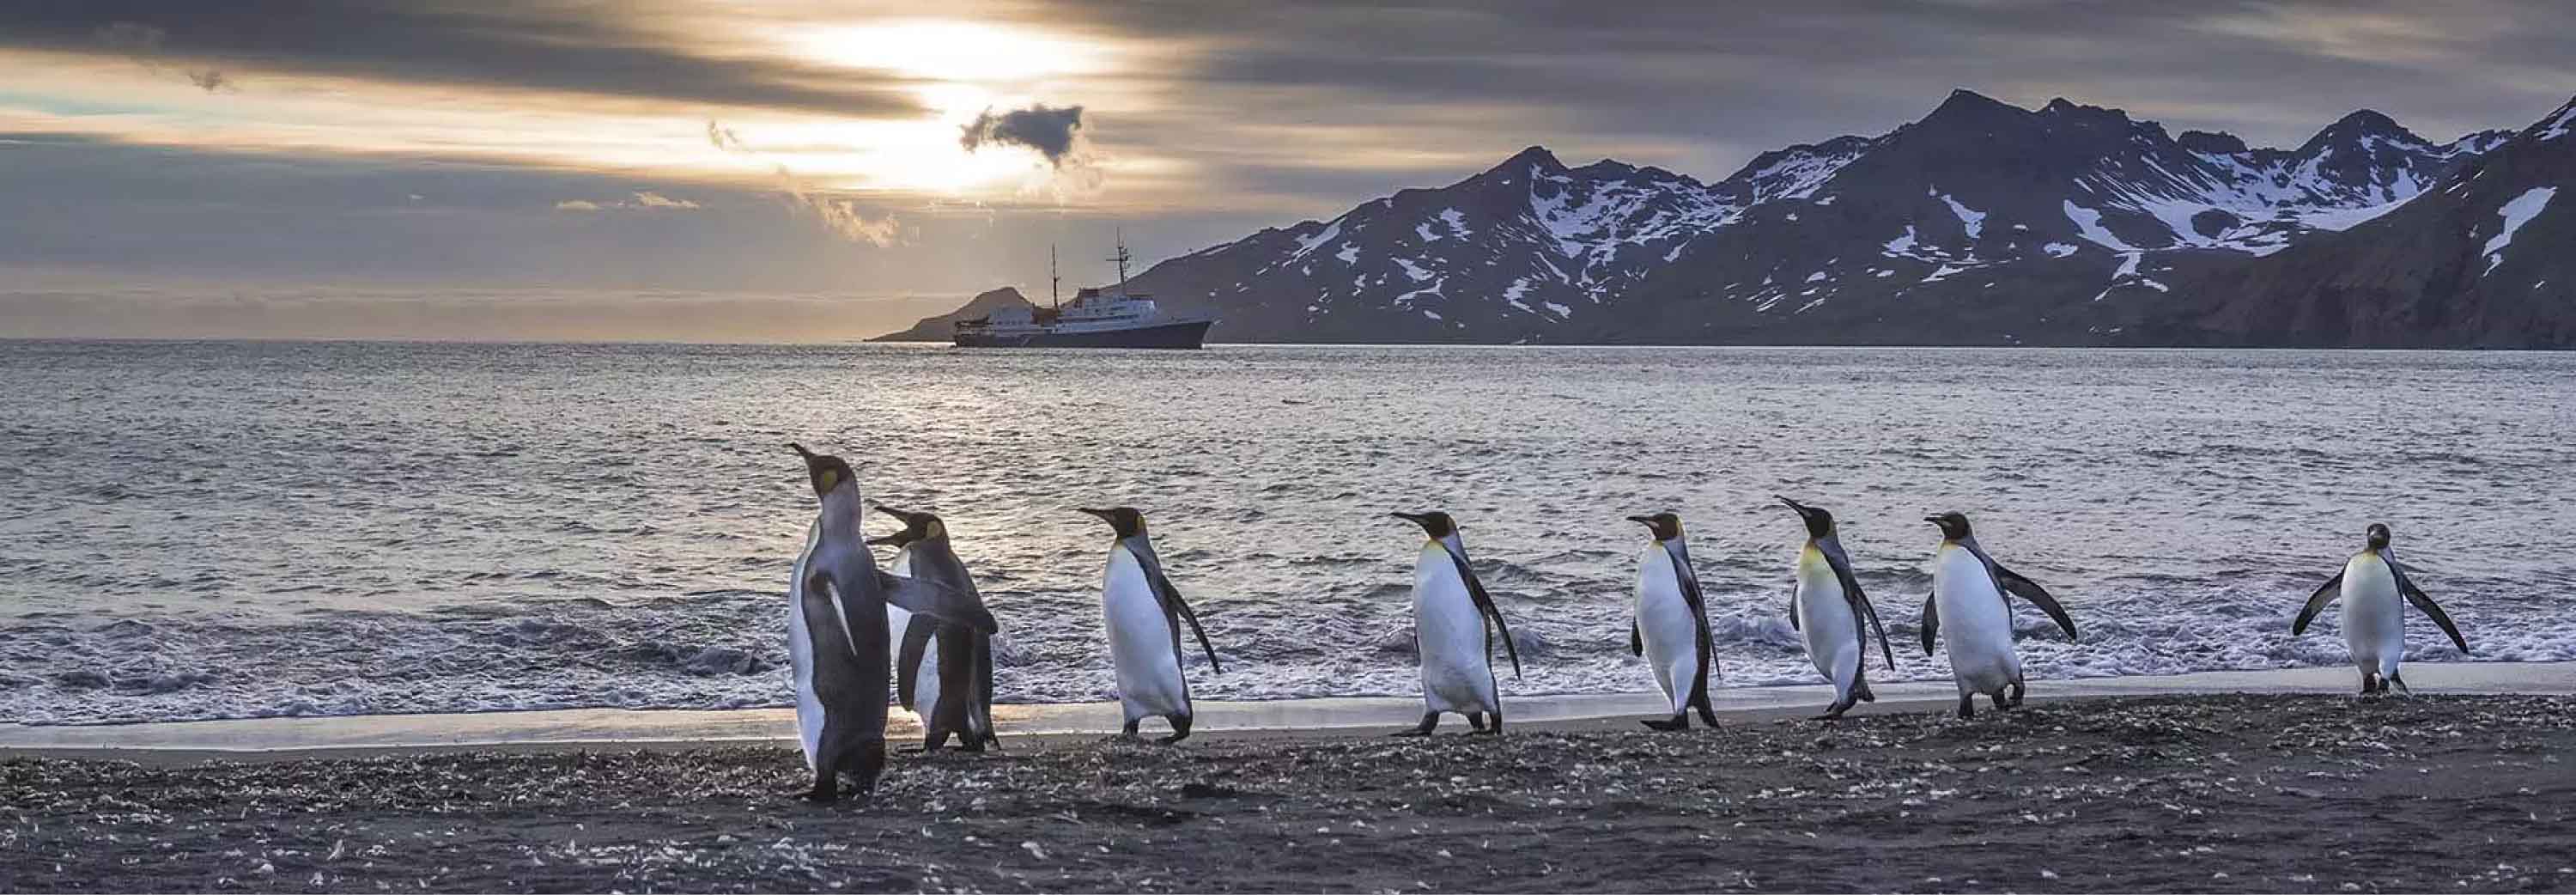 A waddle of penguins parading down the beachfront on the sand at dusk with the snowy mountains in and yellow sun peaking through the clouds in the background.